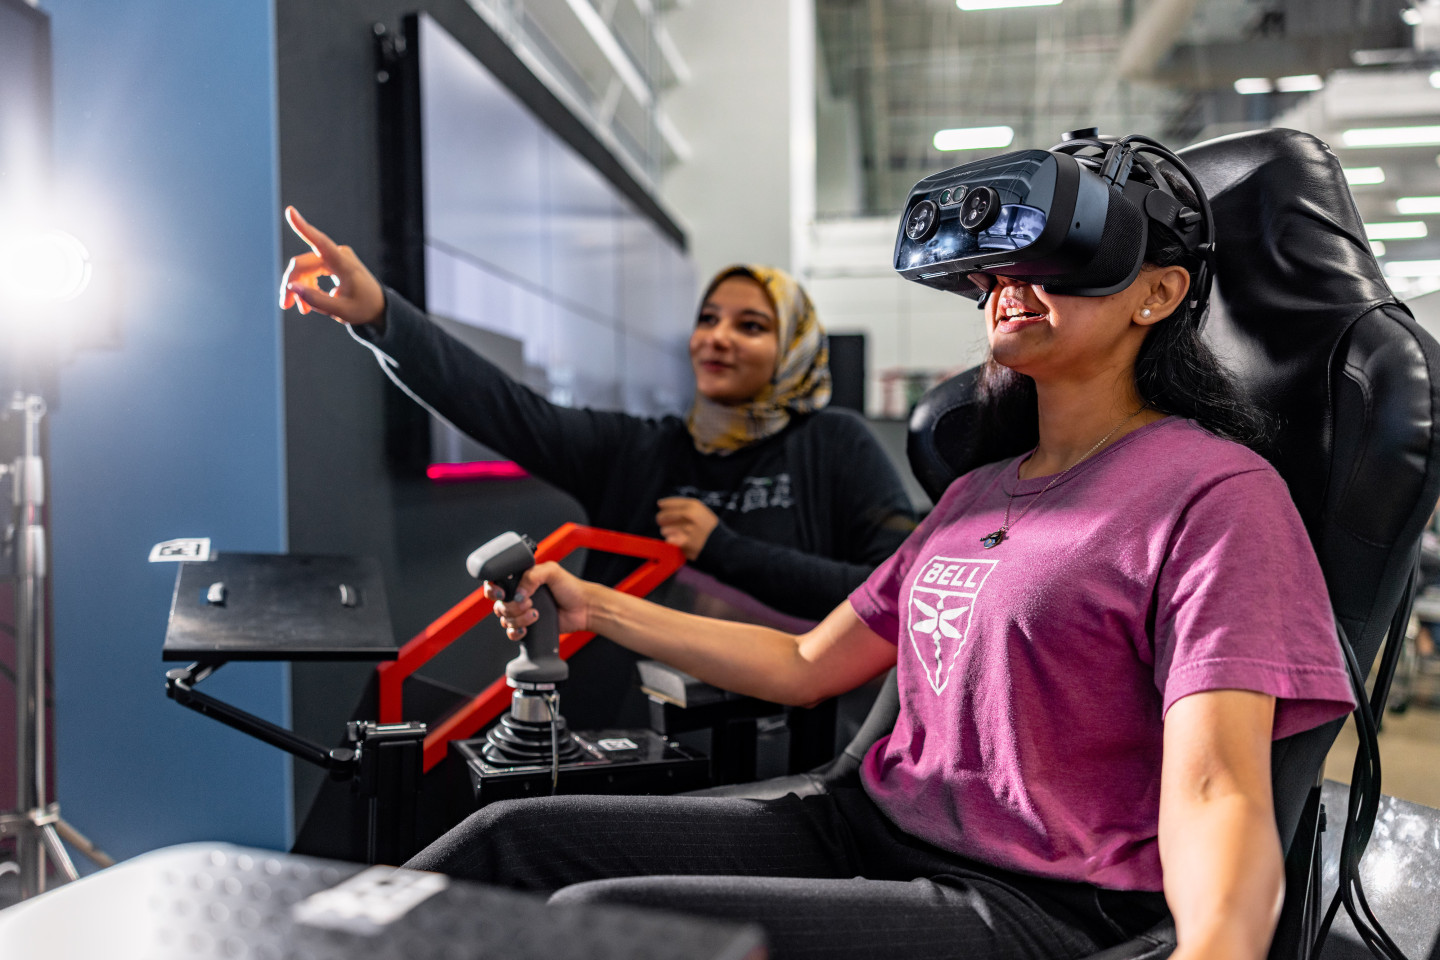 A girl wears a virtual reality headset while someone points at a screen in the background.